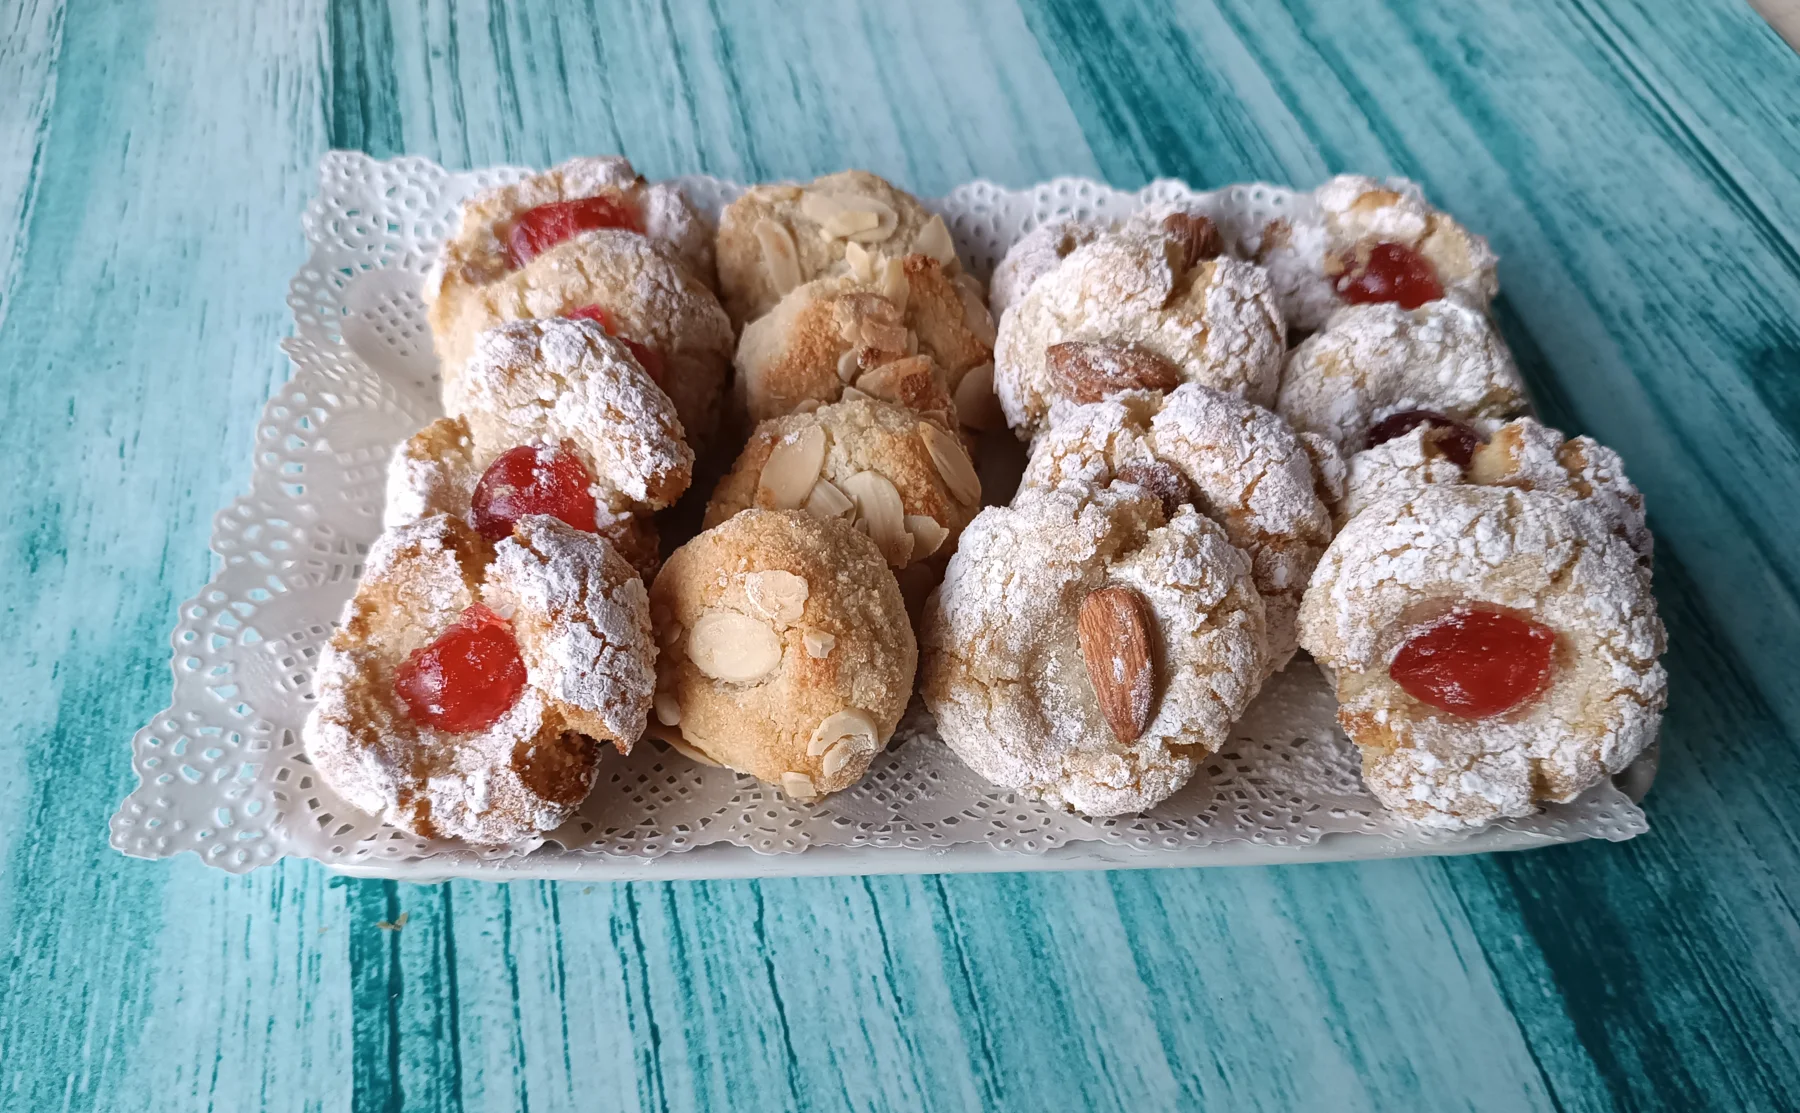 The Cannoli and almond biscuits - 1508681